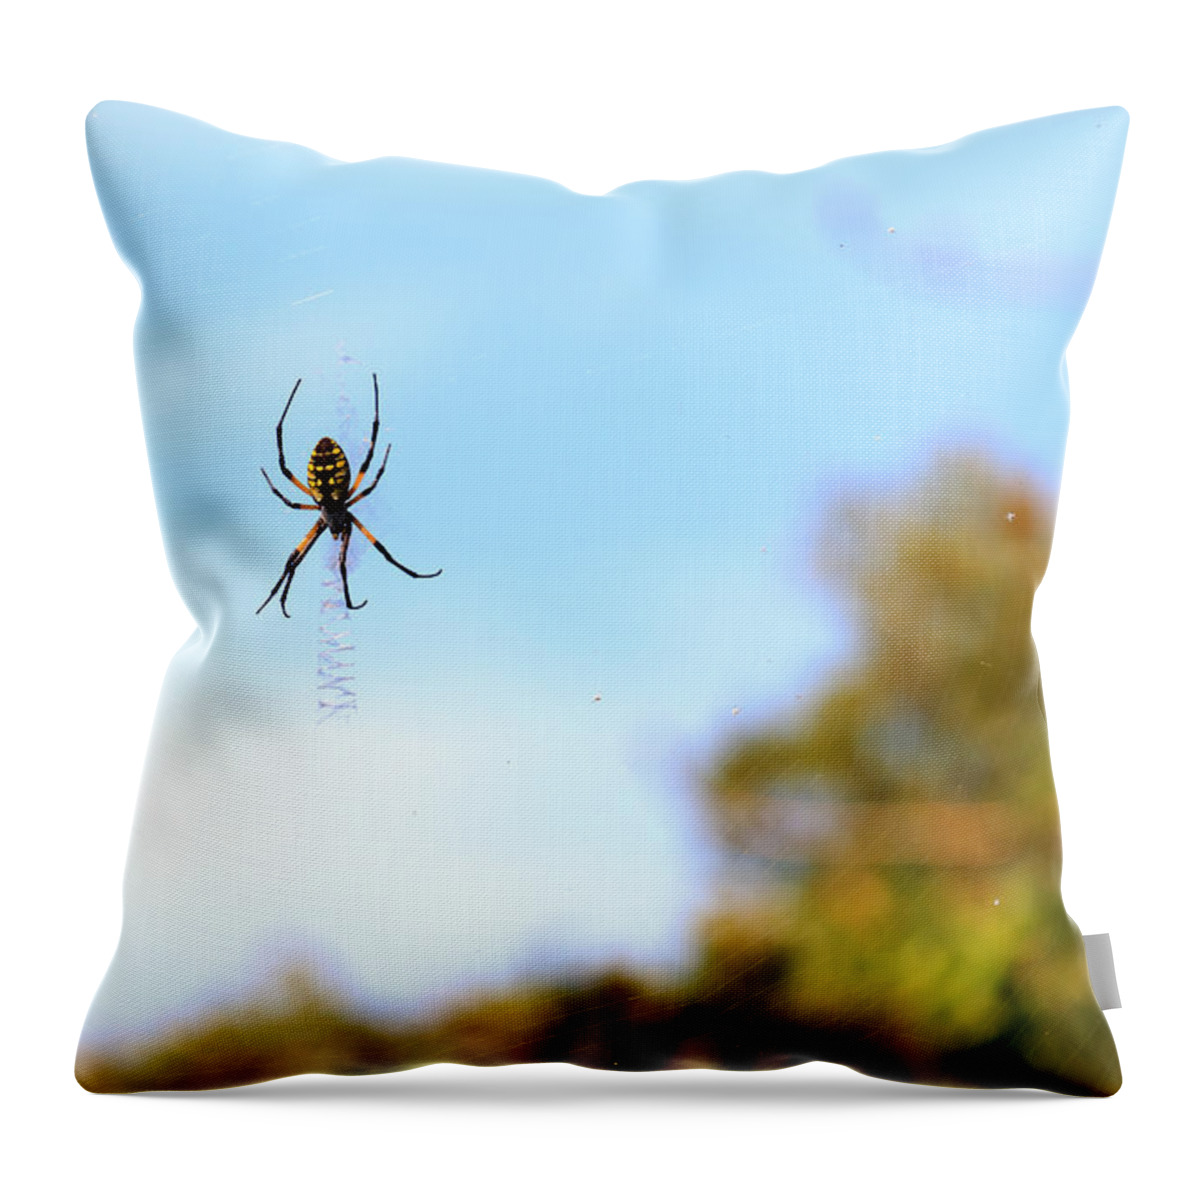 Arachnid Throw Pillow featuring the photograph Suspended Spider by Travis Rogers